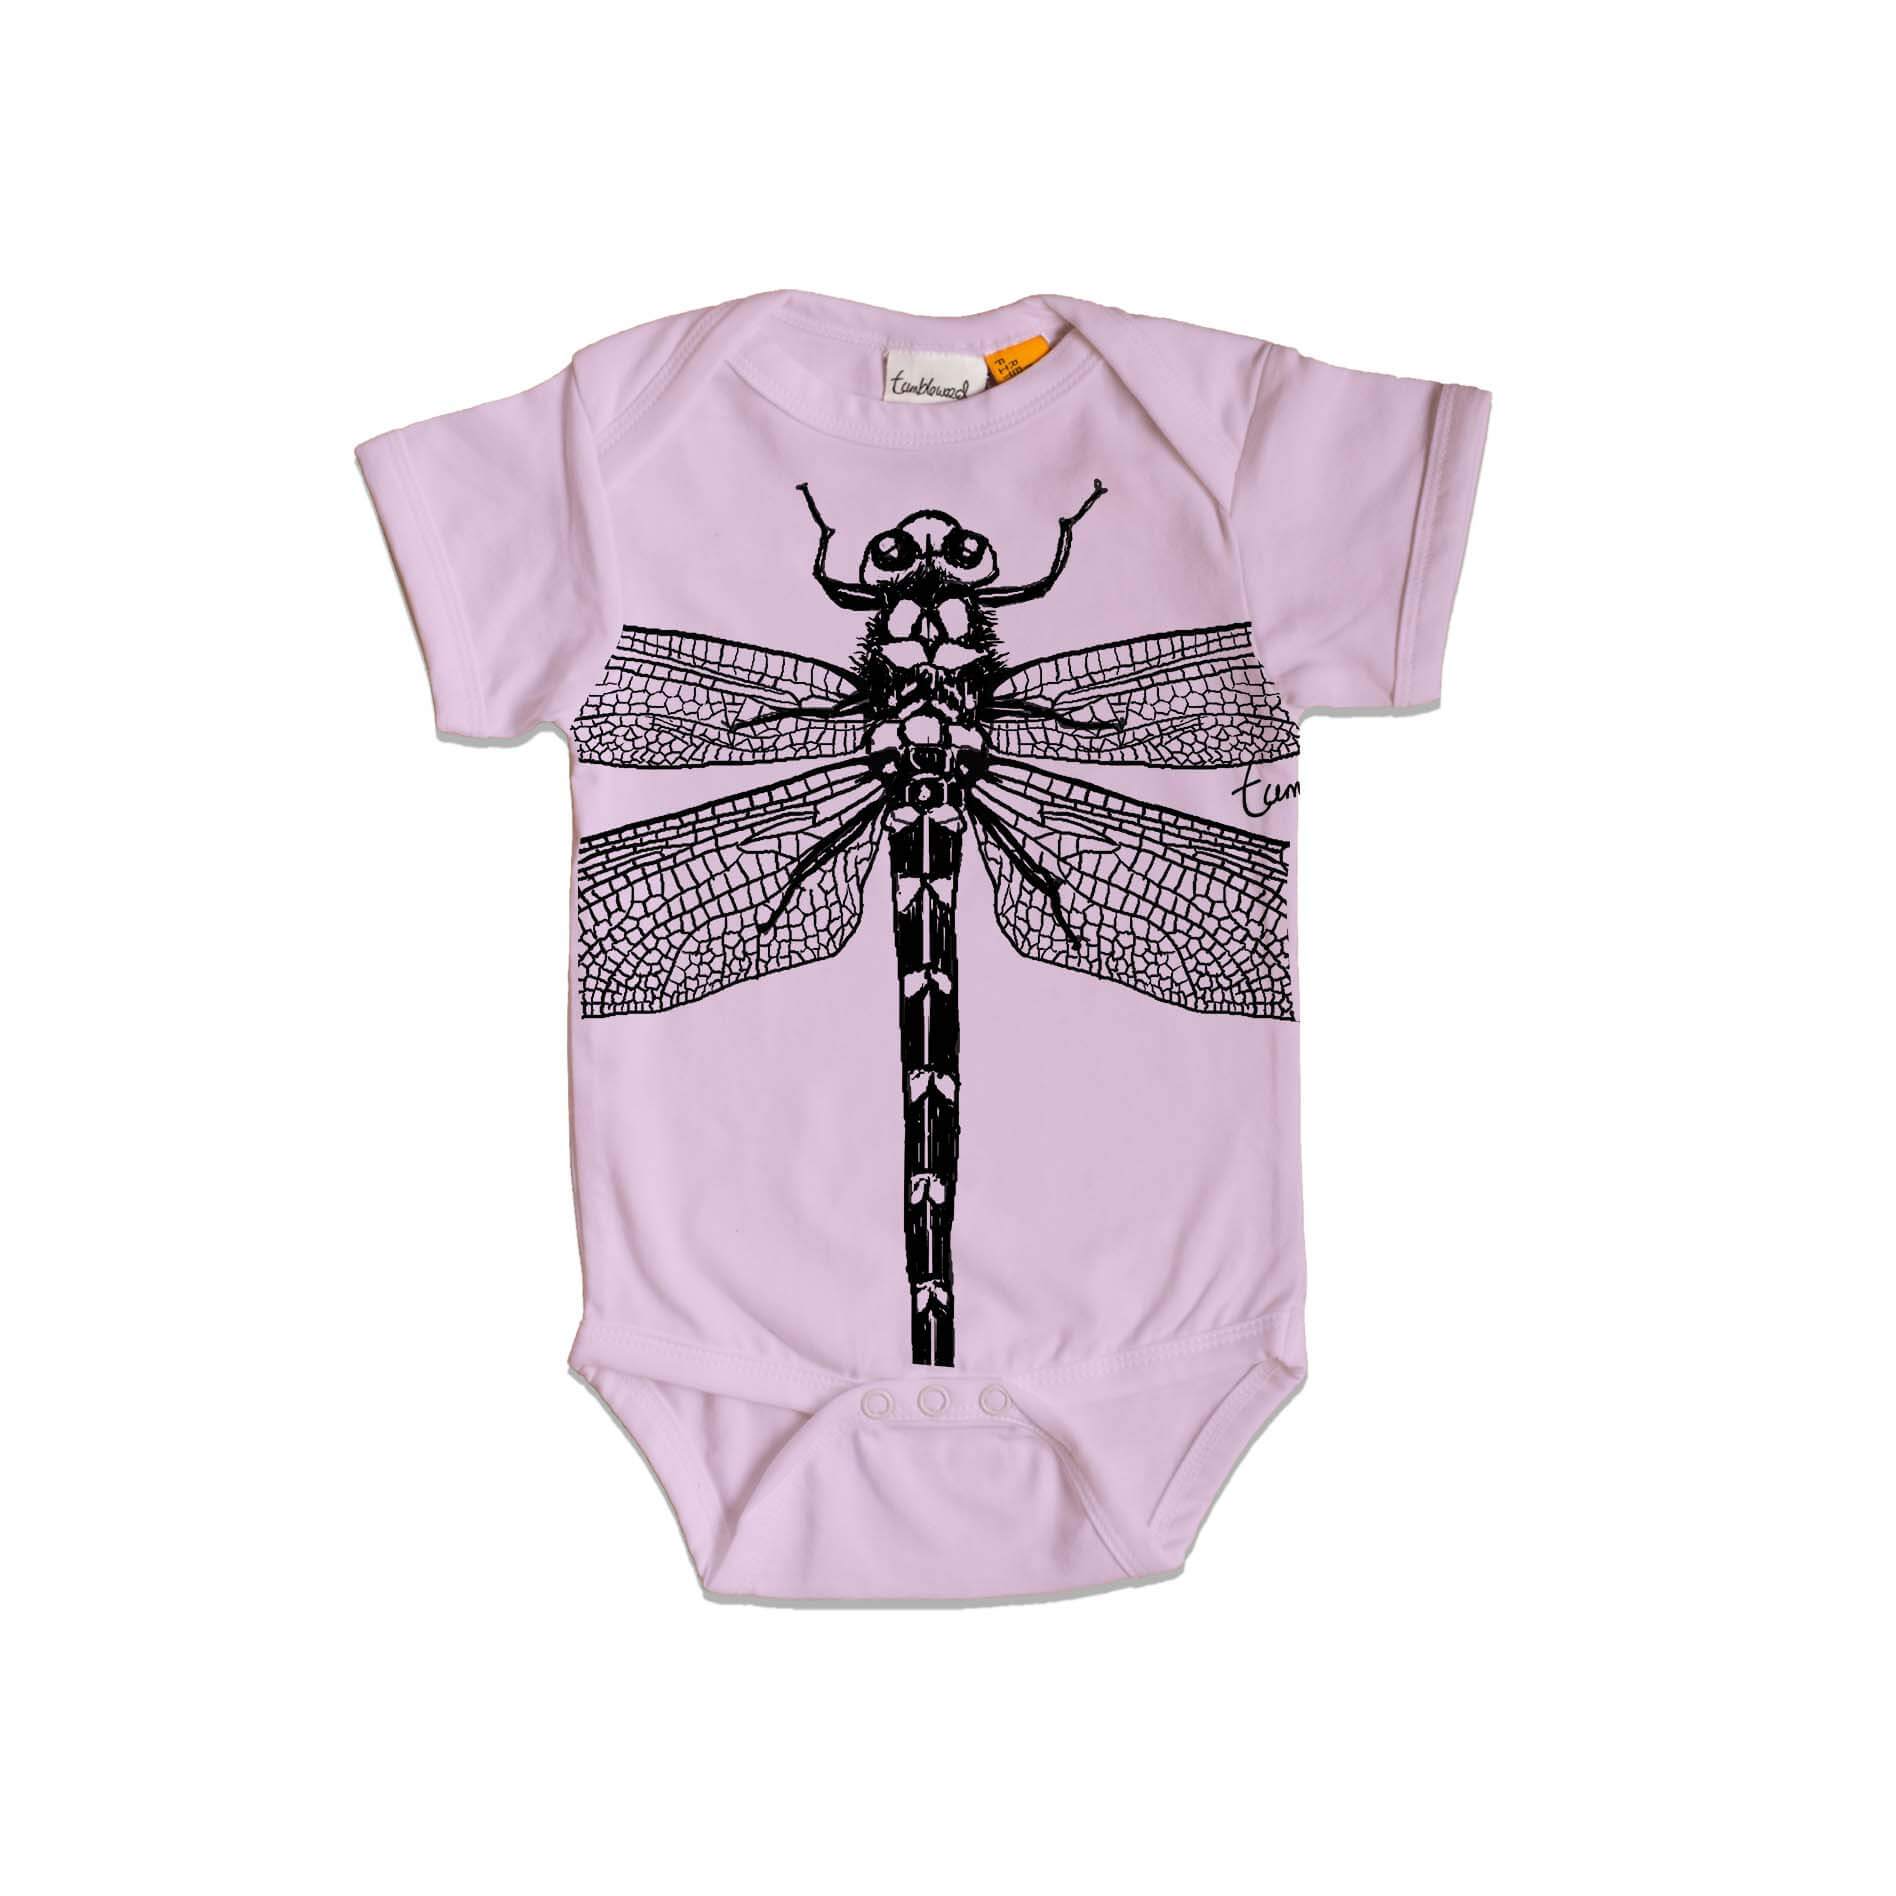 Short sleeved, purple, organic cotton, baby onesie featuring a screen printed Dragonfly design.
 design.